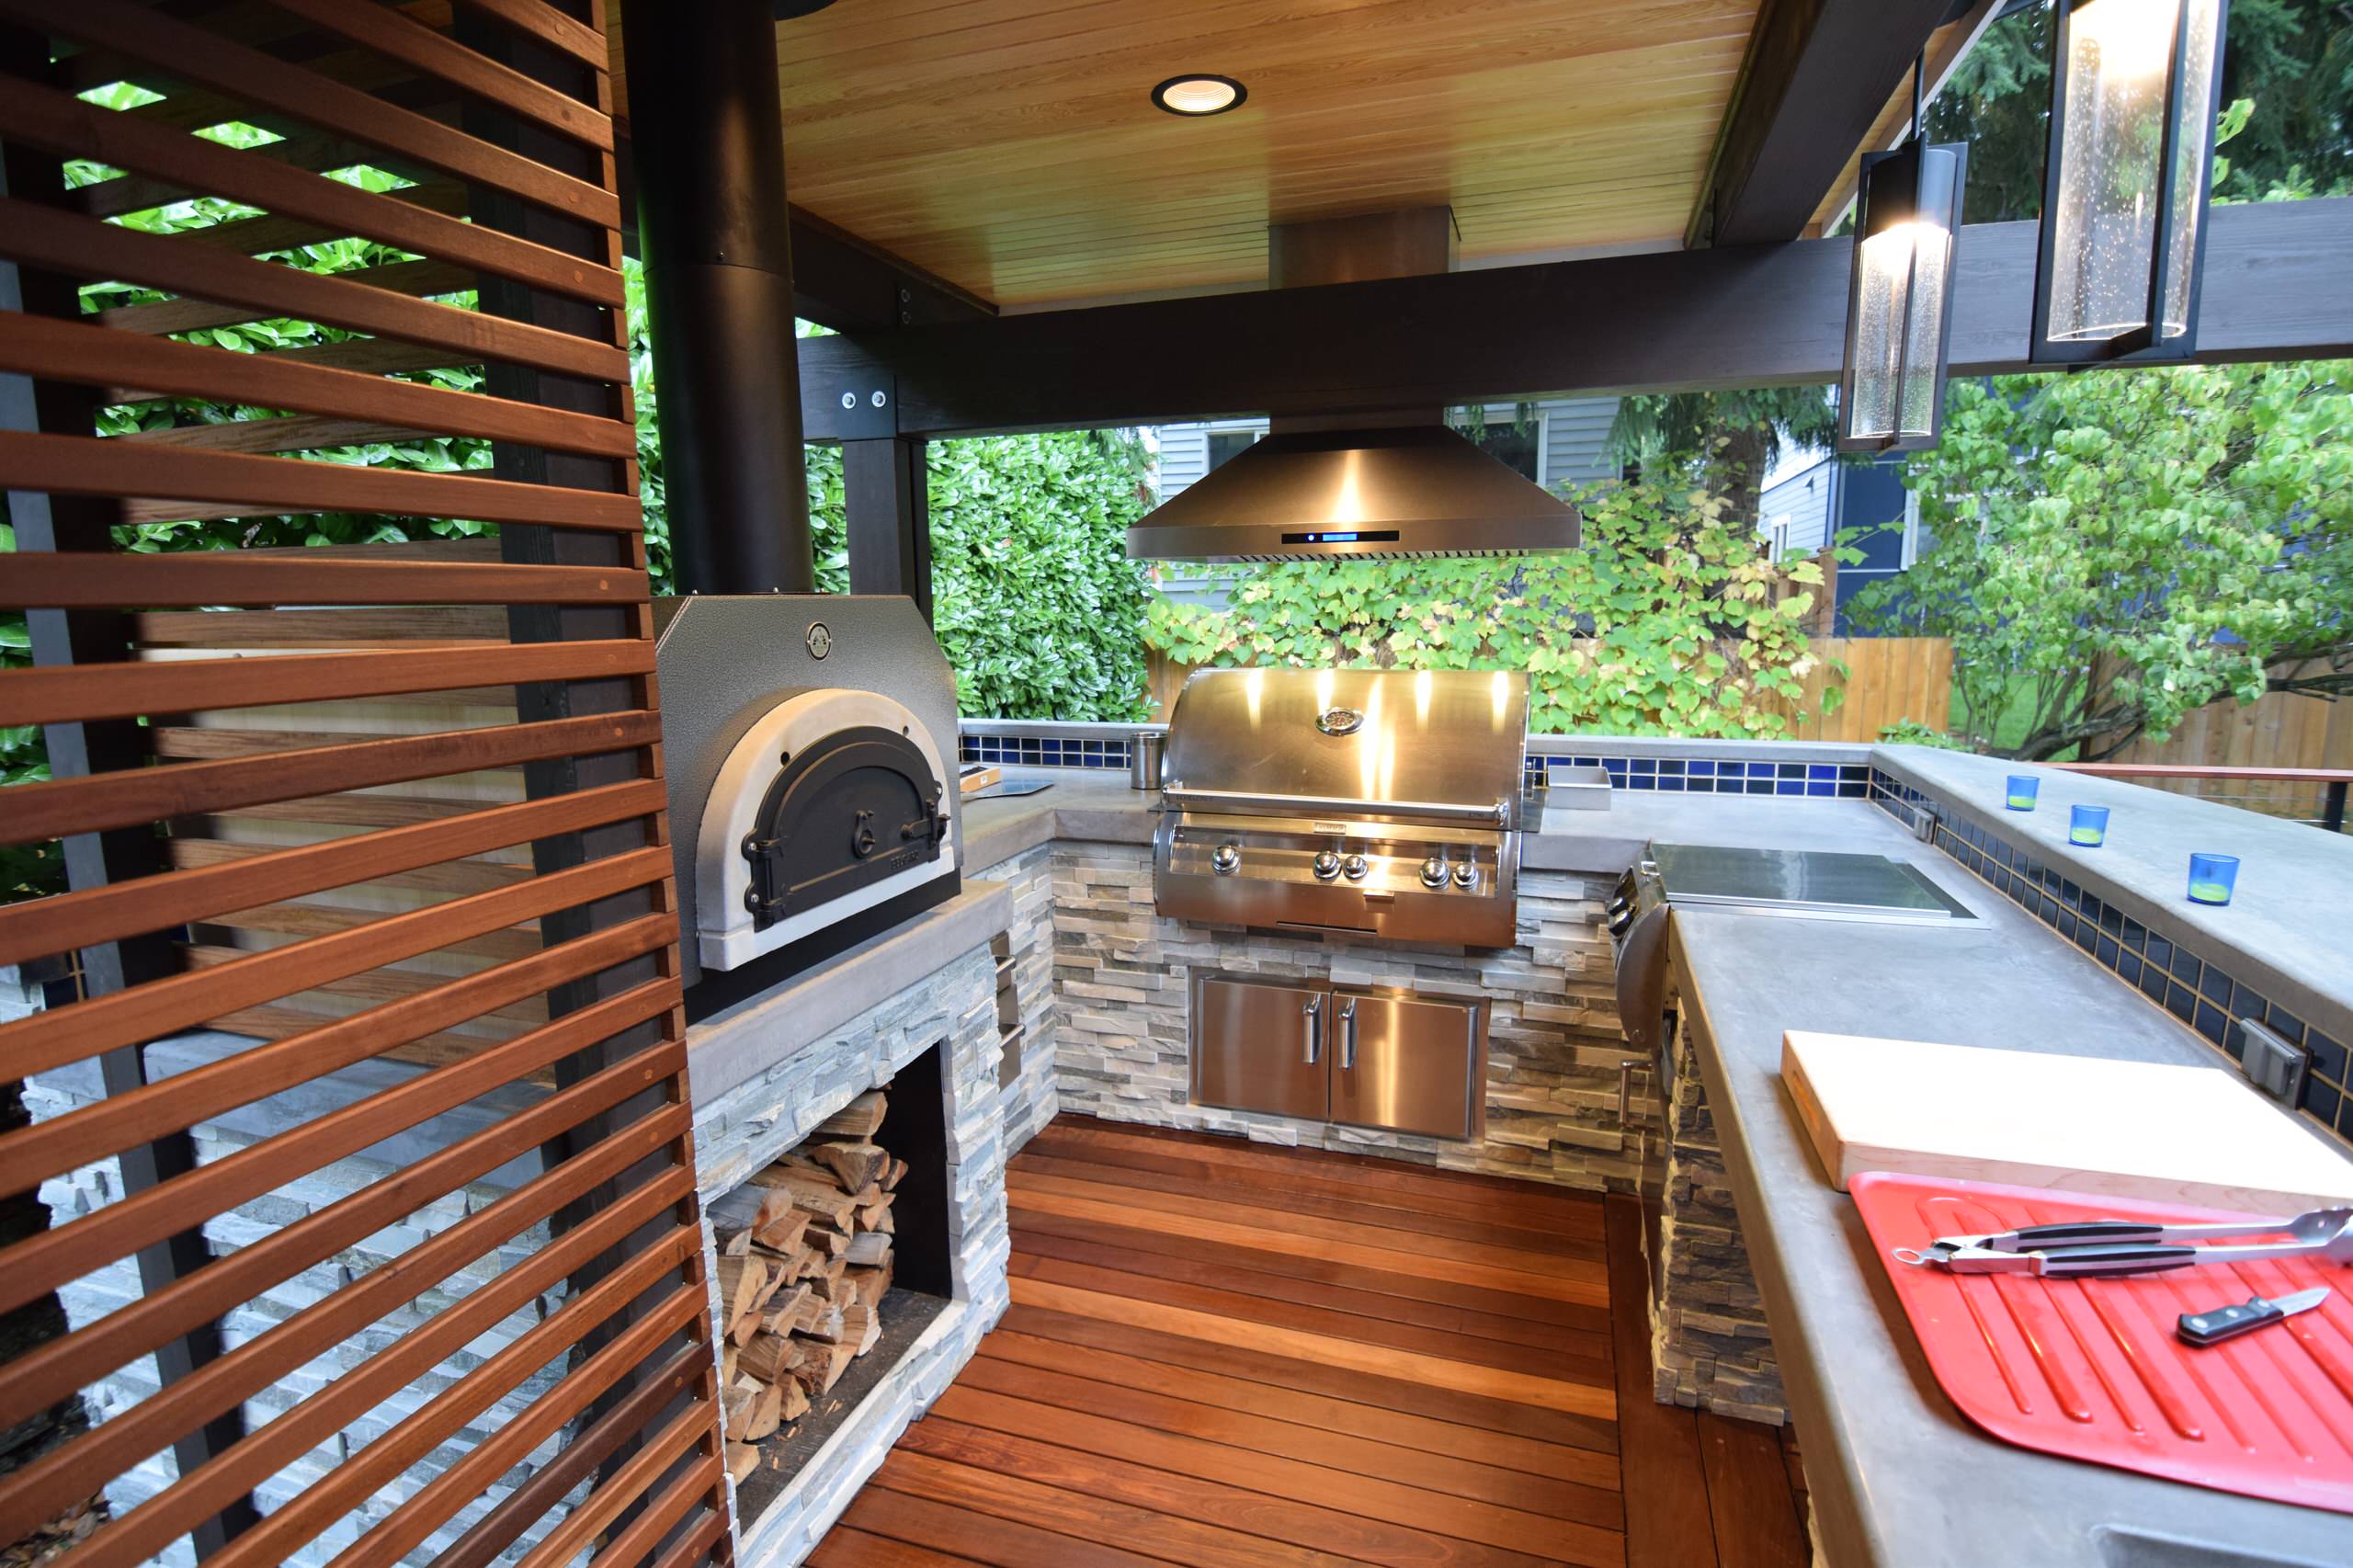 Galley kitchen with pizza oven, grill, cooktop, sink